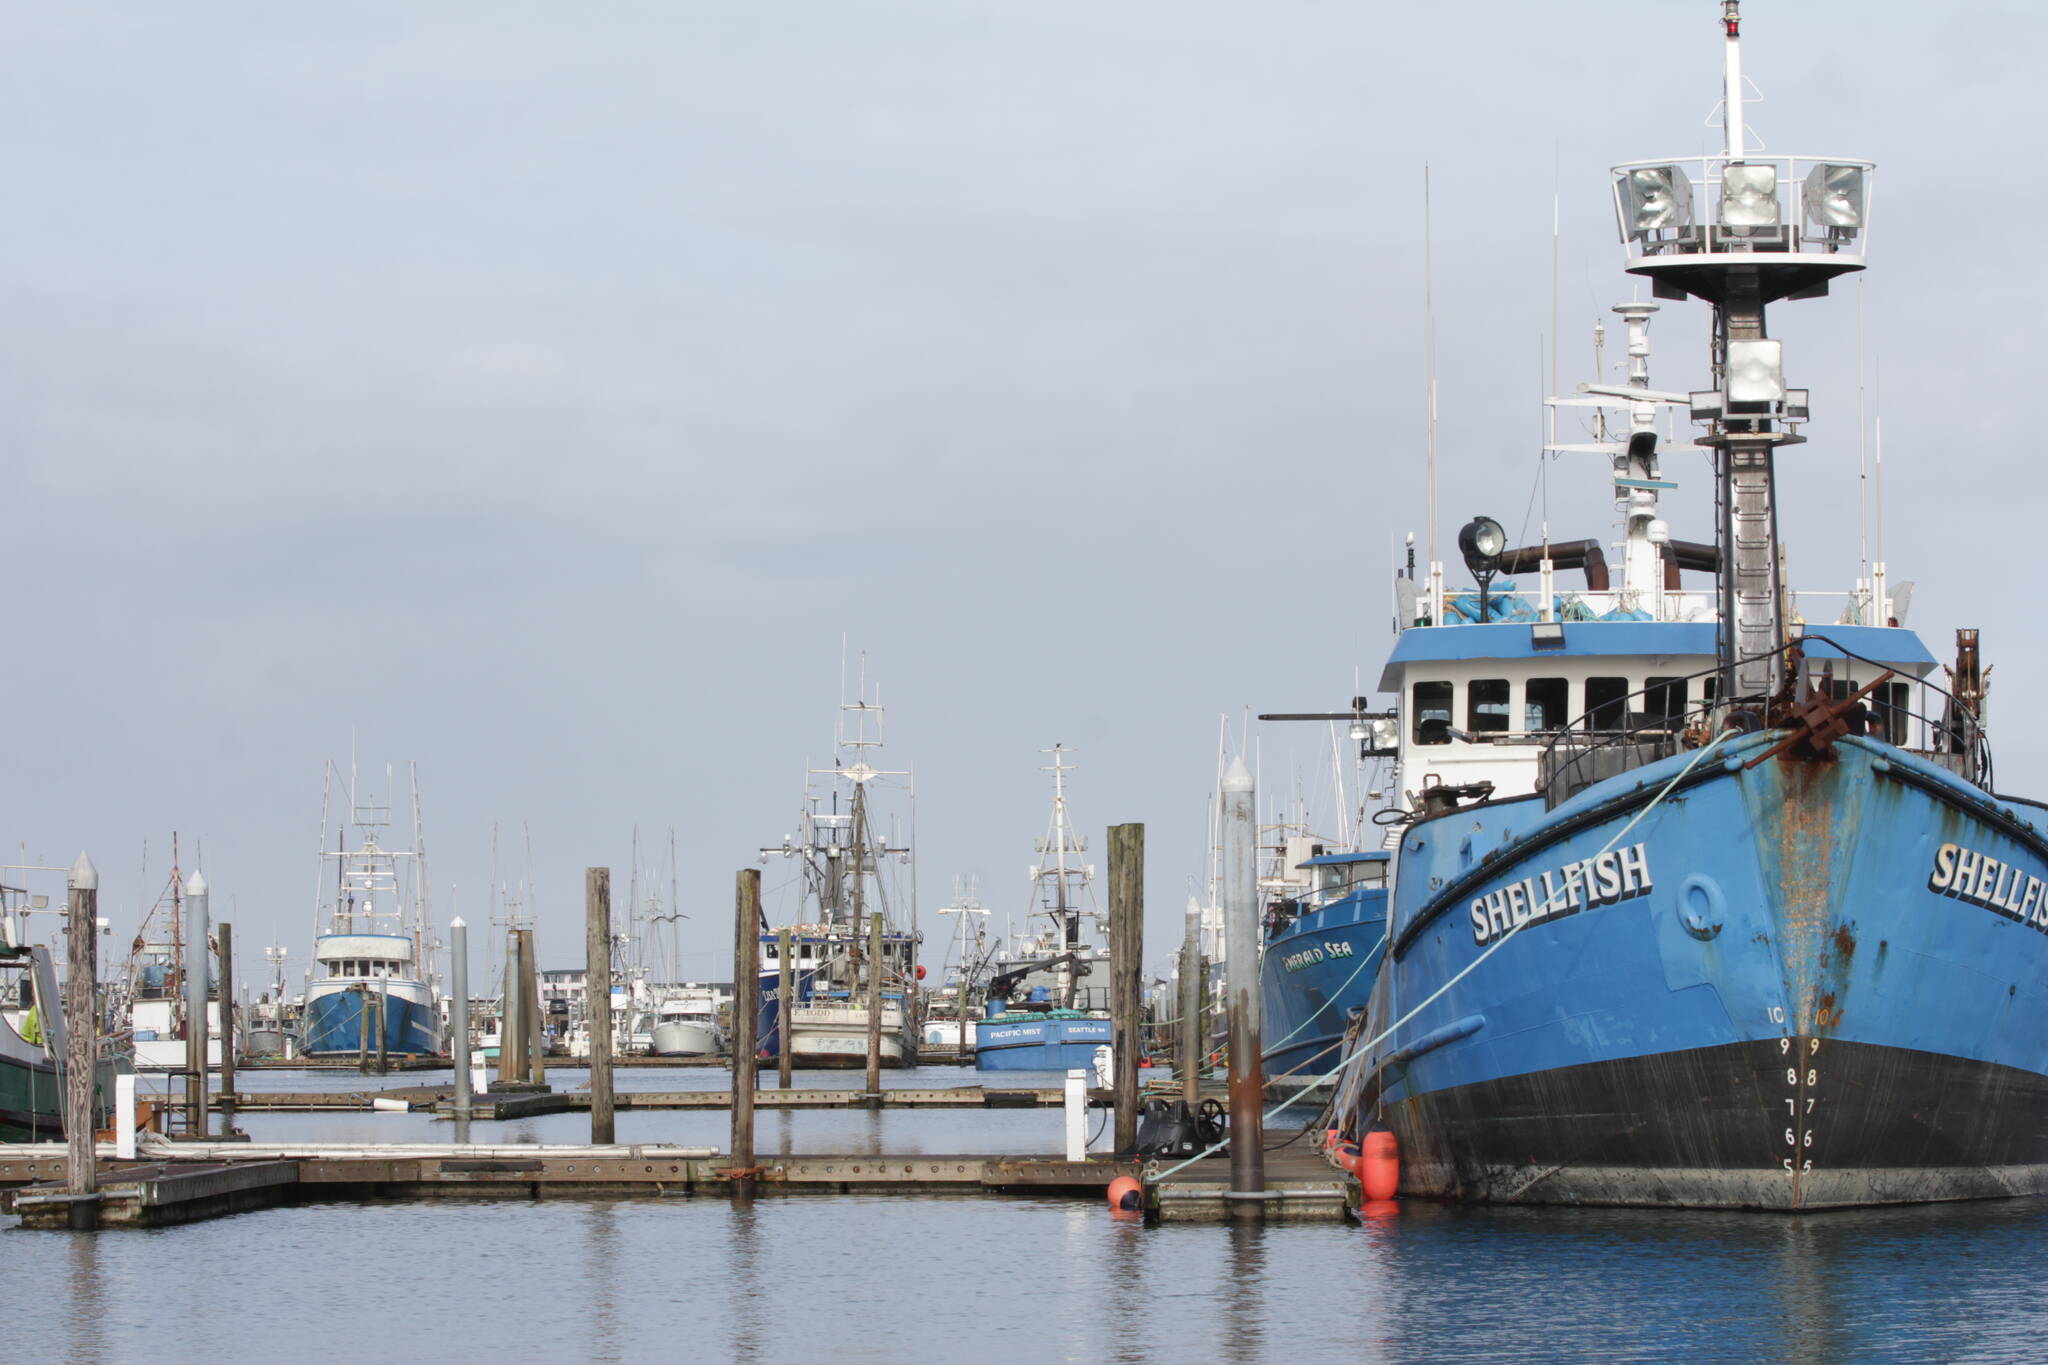 A fishing vessel sits alongside an empty slip at Westport Marina on March 1. The marina is working its way through planning a modernization process to accommodate modern vessels, which are larger than the docks built in the ’80s were designed for. (Michael S. Lockett / The Daily World)